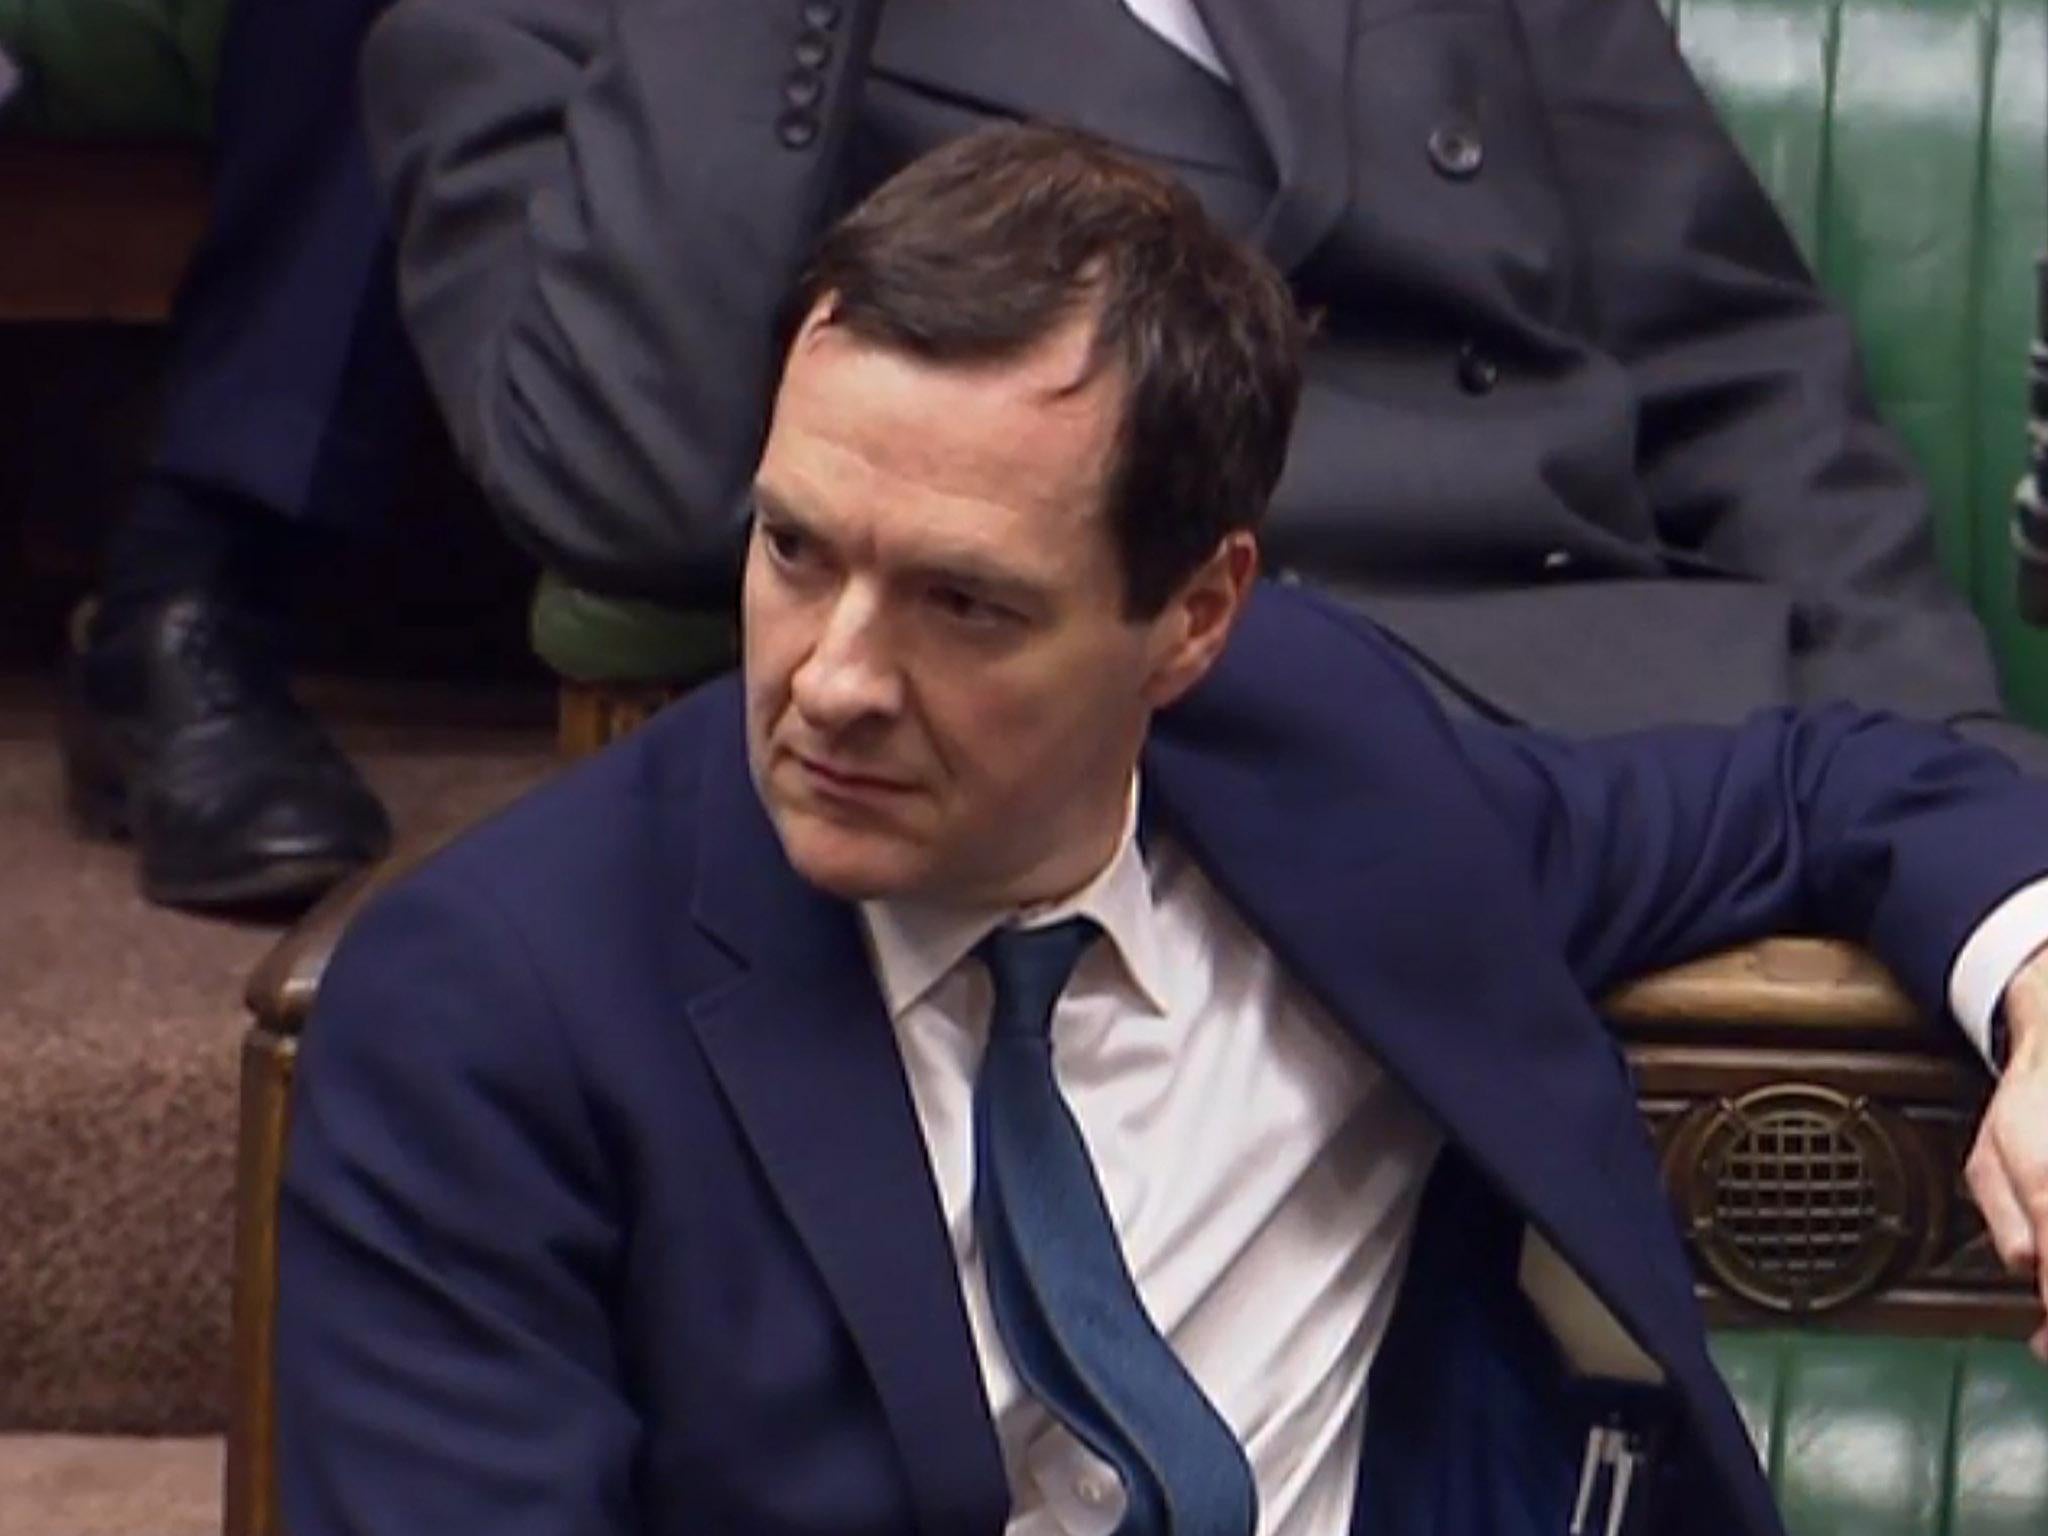 George Osborne in the House of Commons